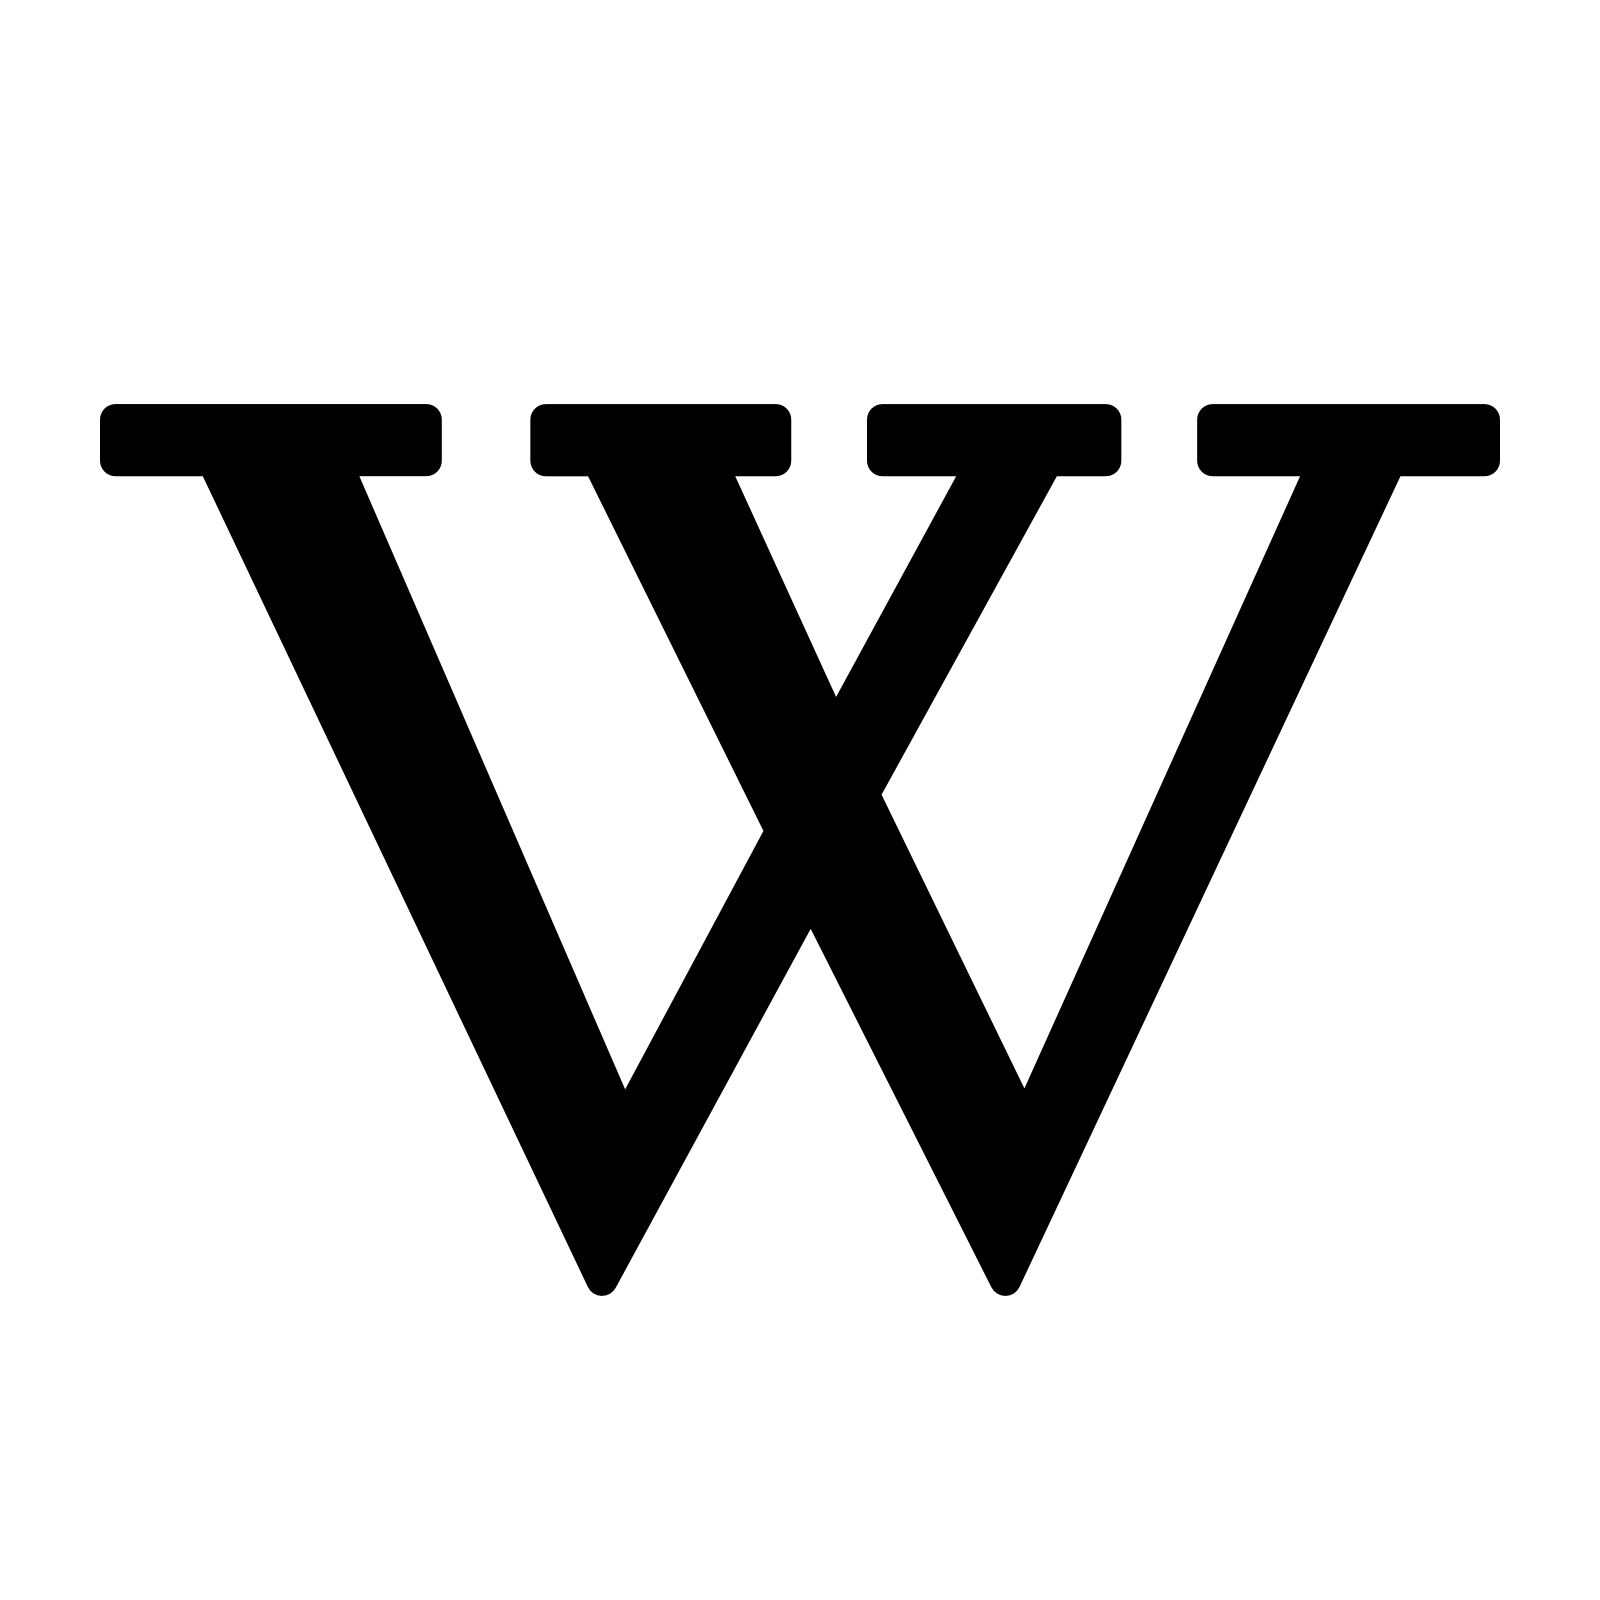 Wikipedia PNG images Download 